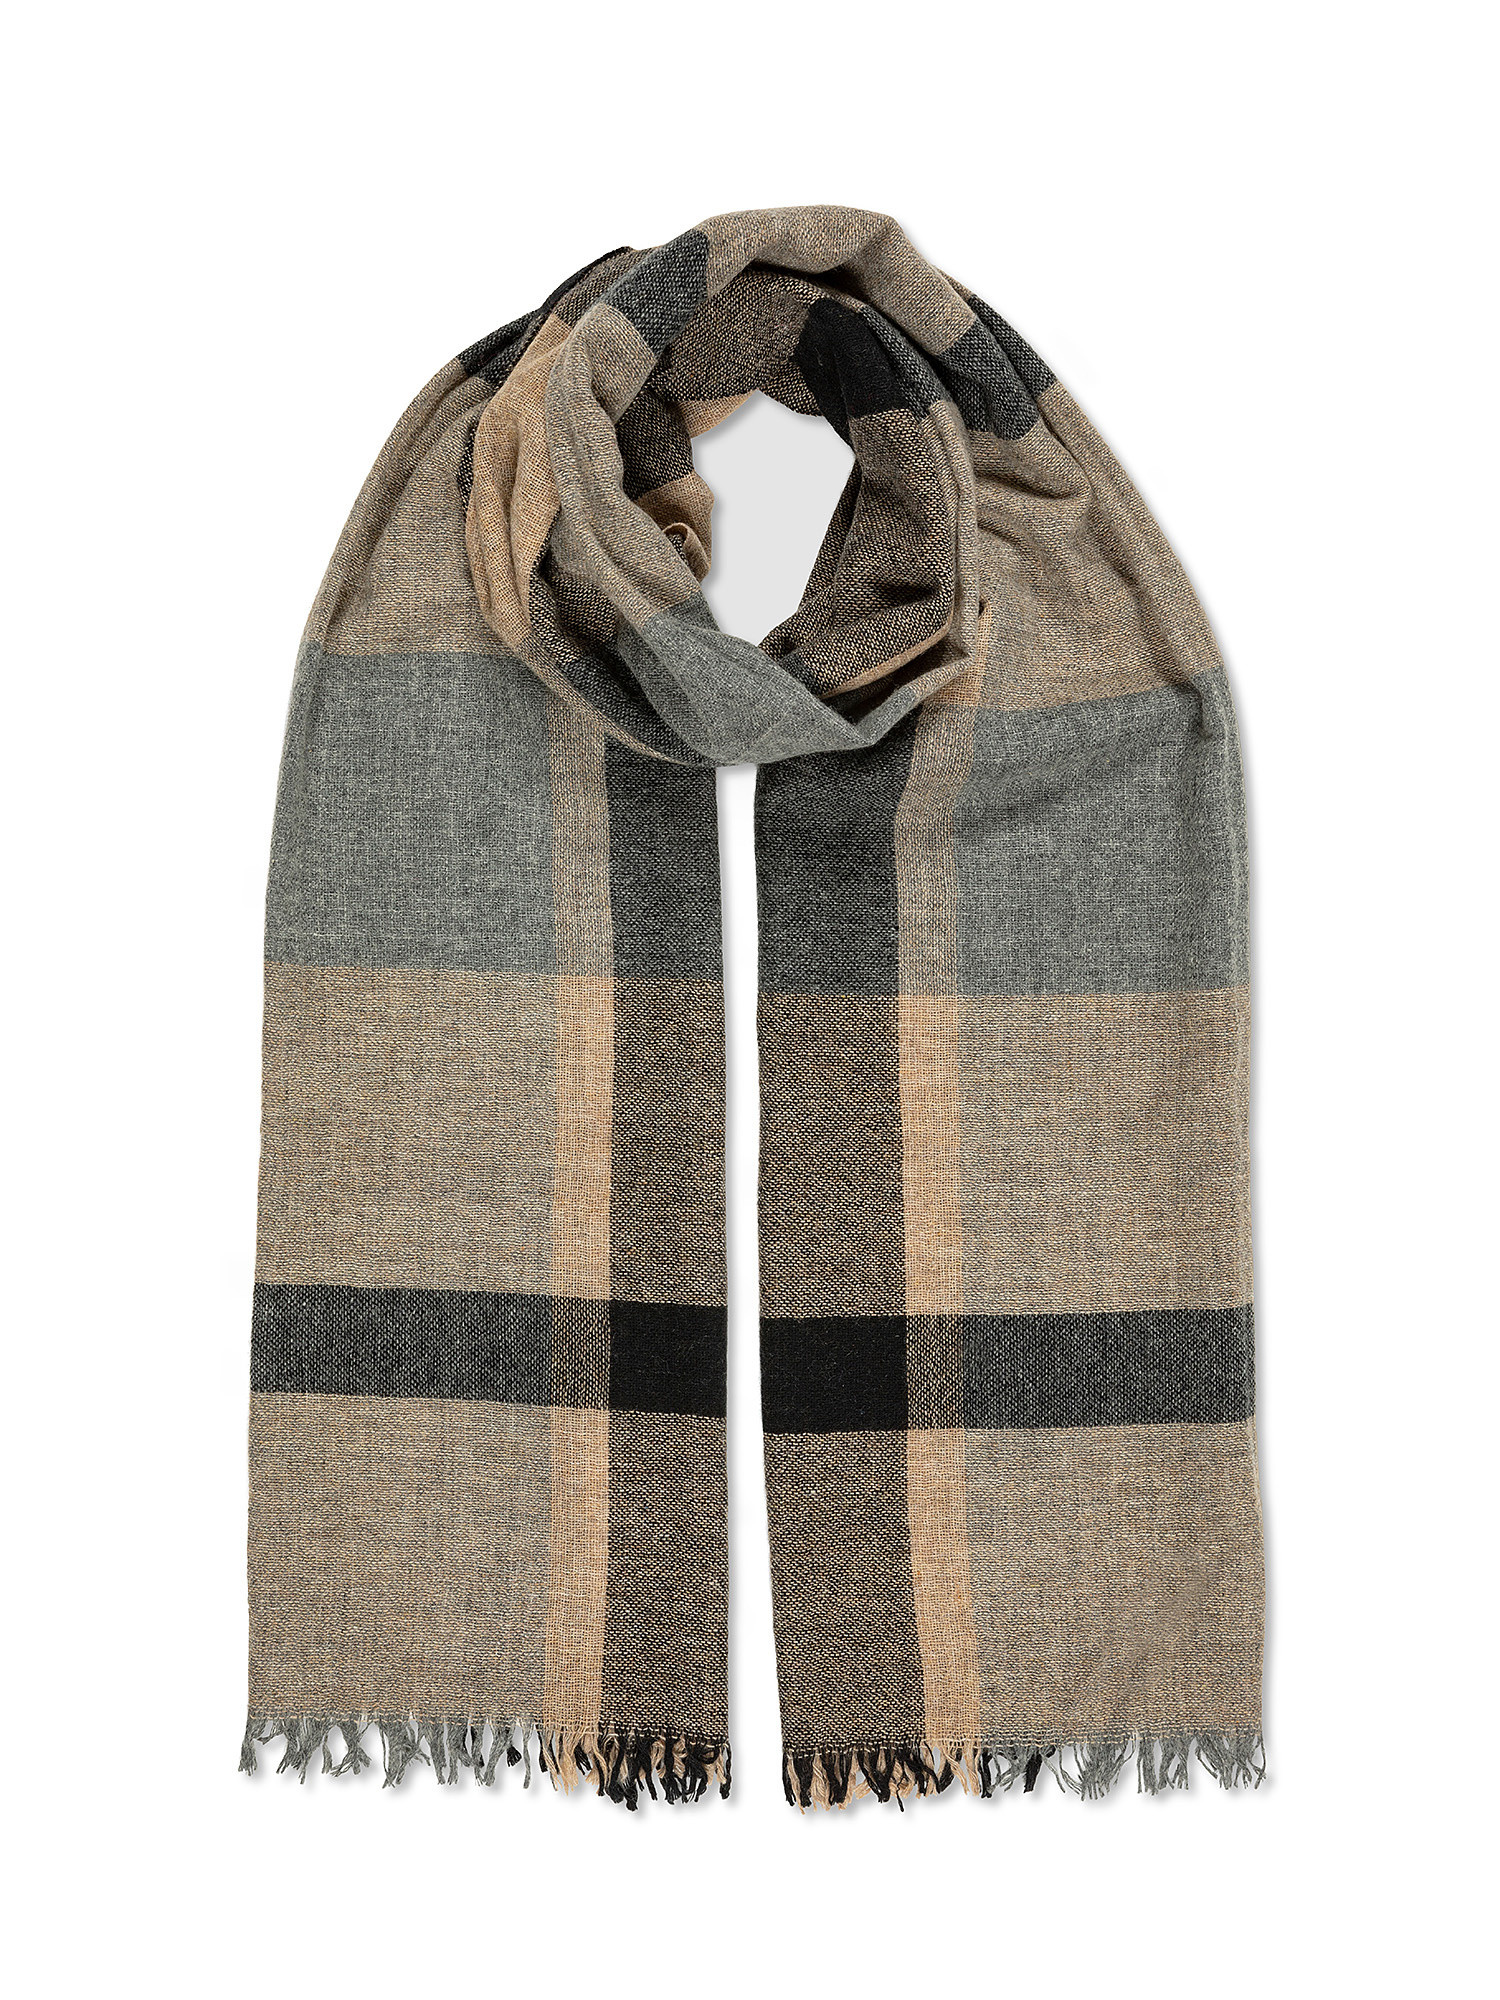 Checked wool blend scarf, Black, large image number 0